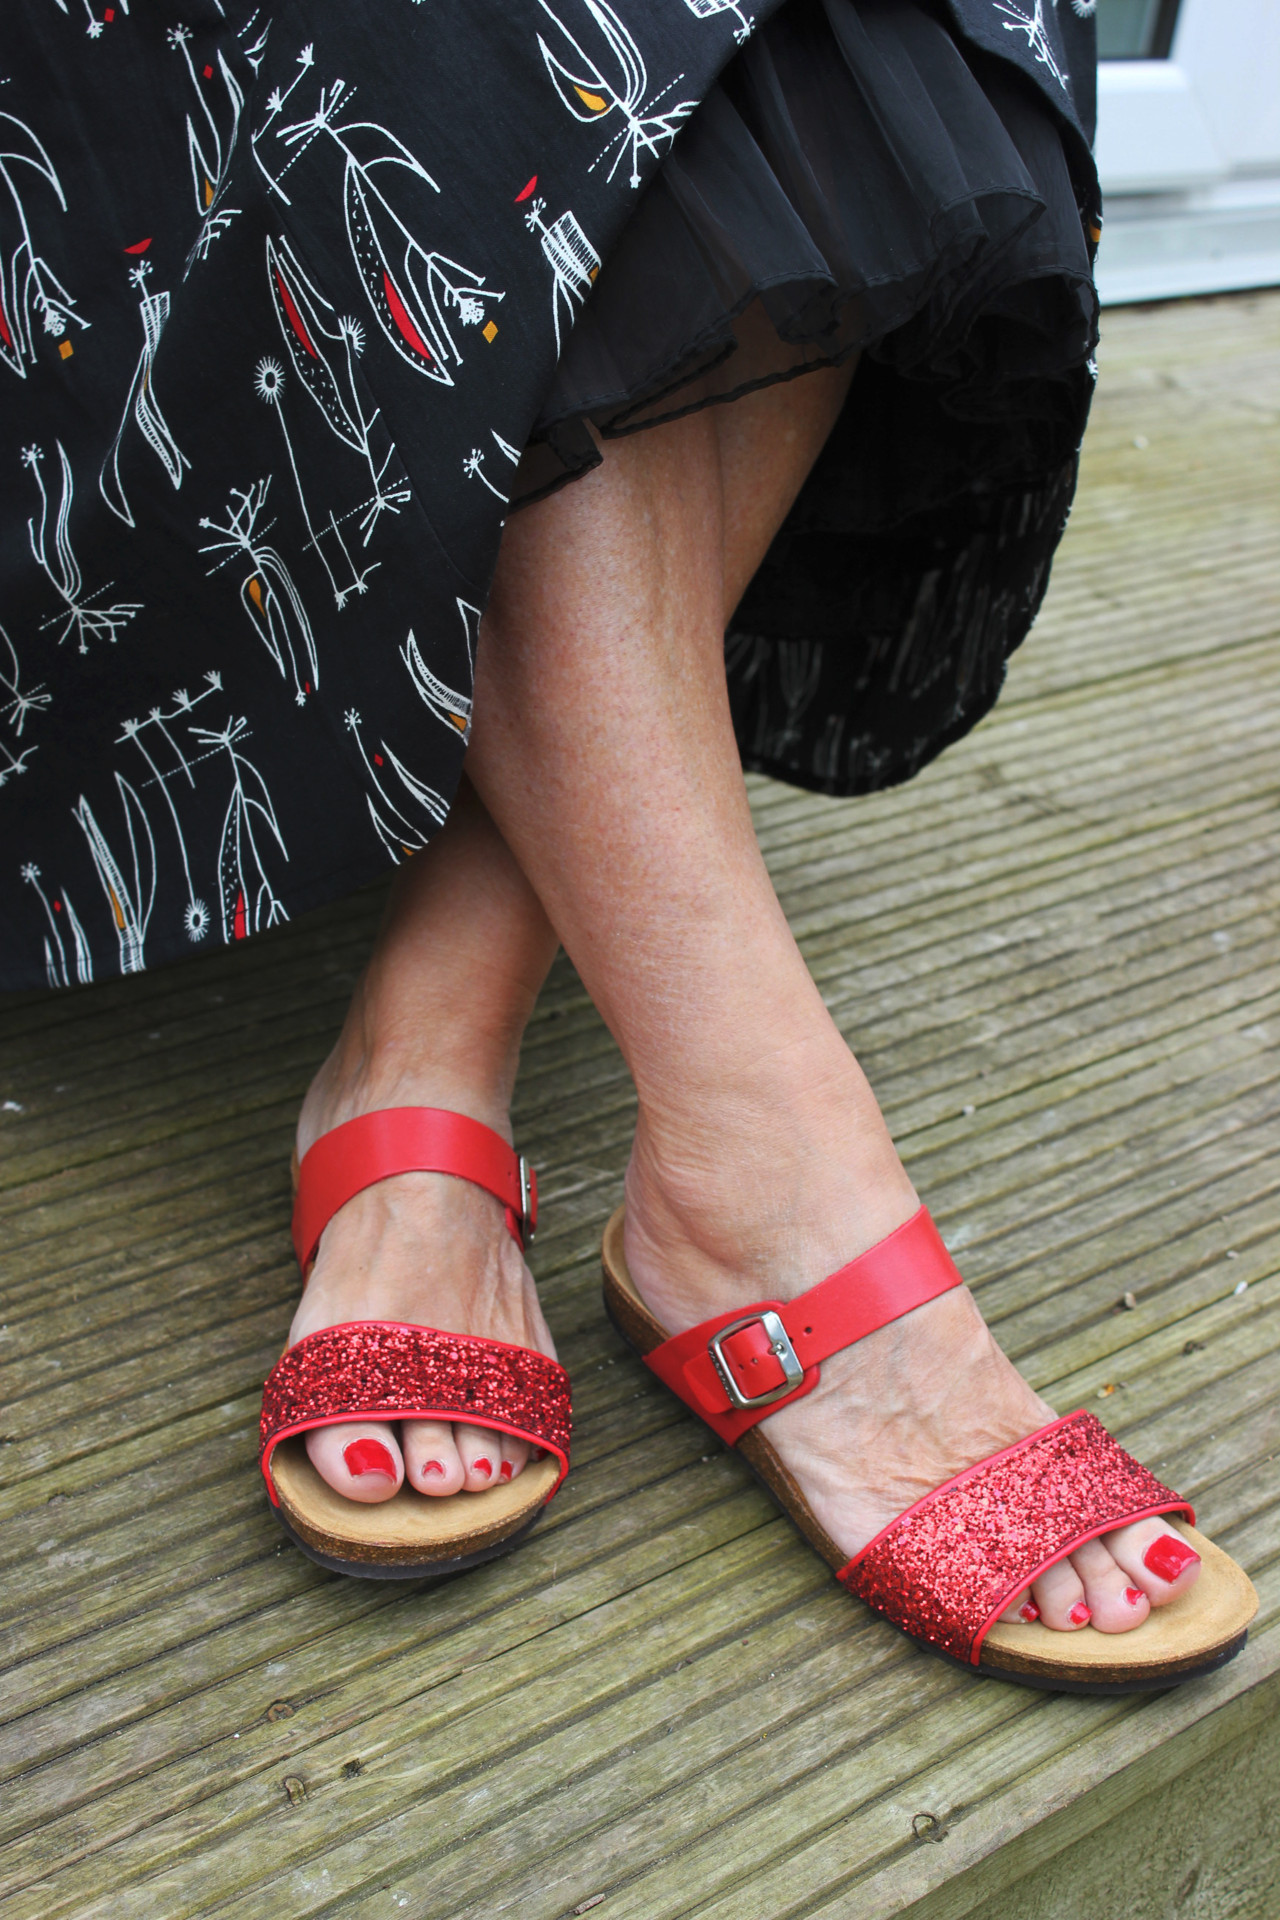 Moshulu sparkly sandals